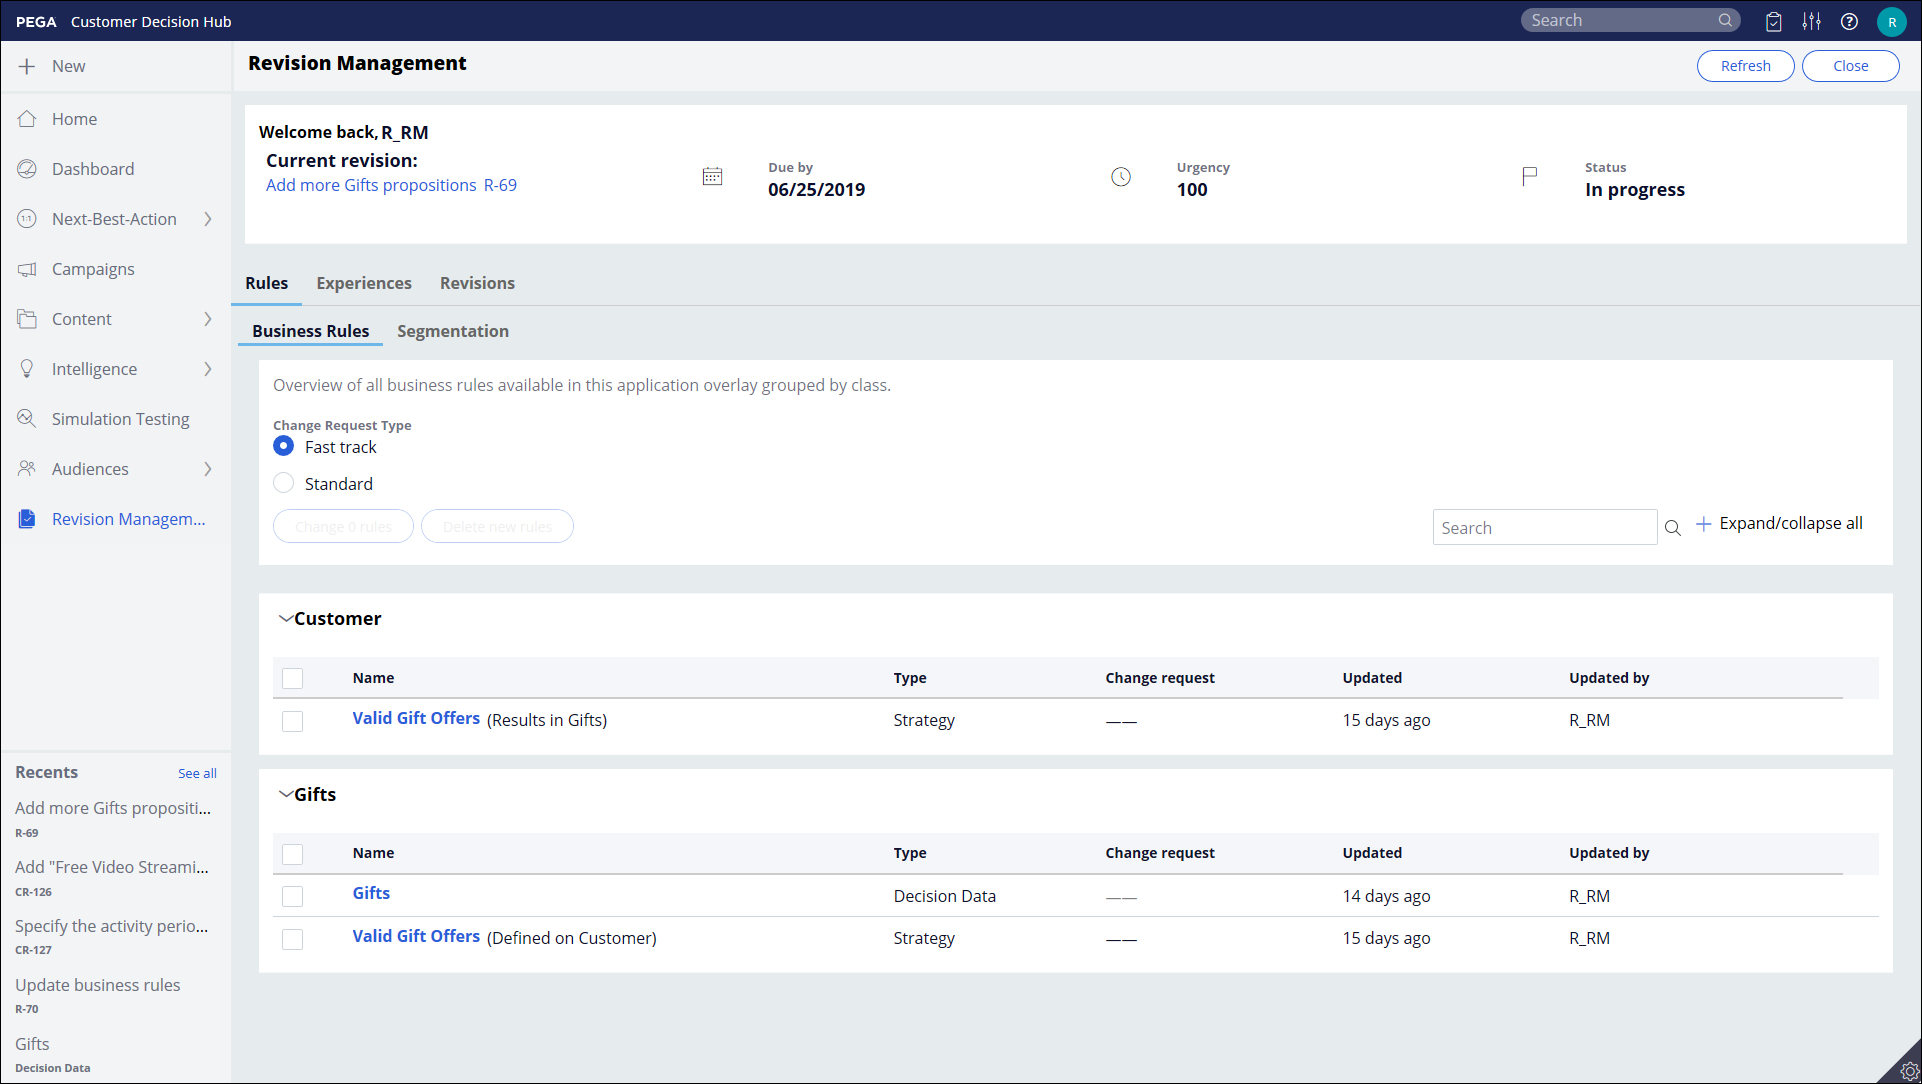 Screen capture of the Revision Management landing page in the Pega Customer Decision Hub portal